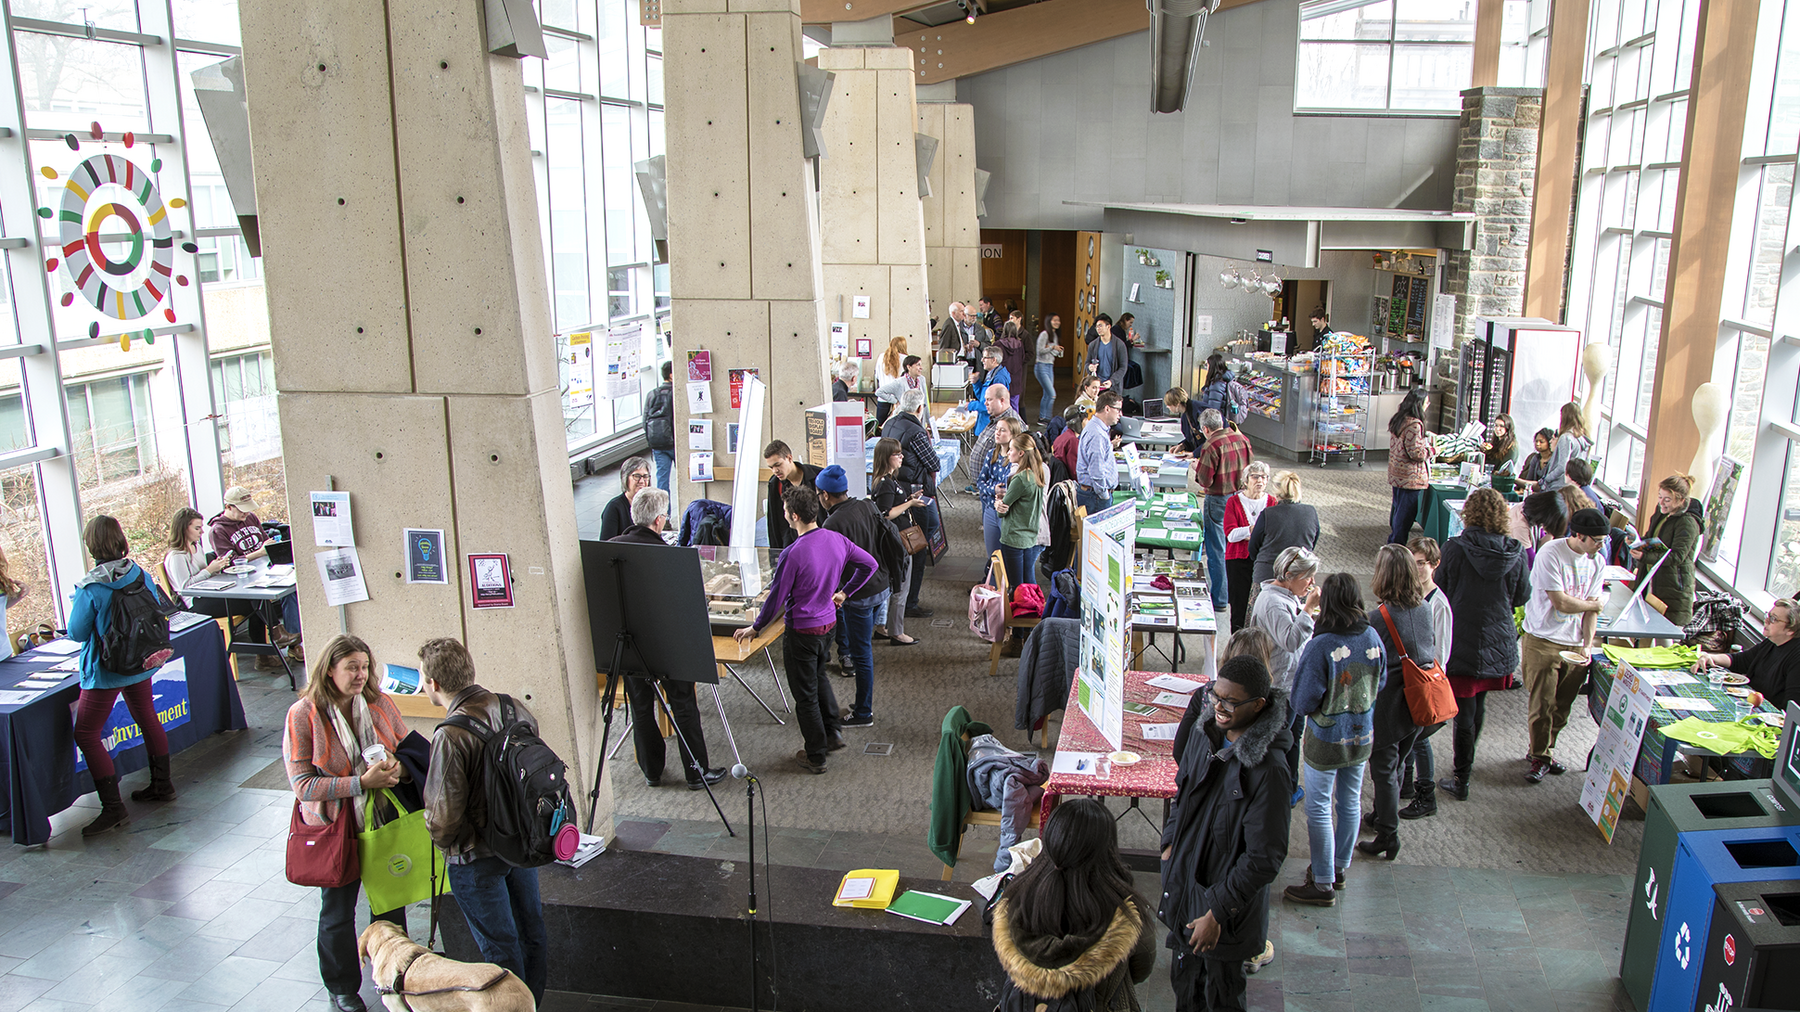 Poster session for sustainability projects